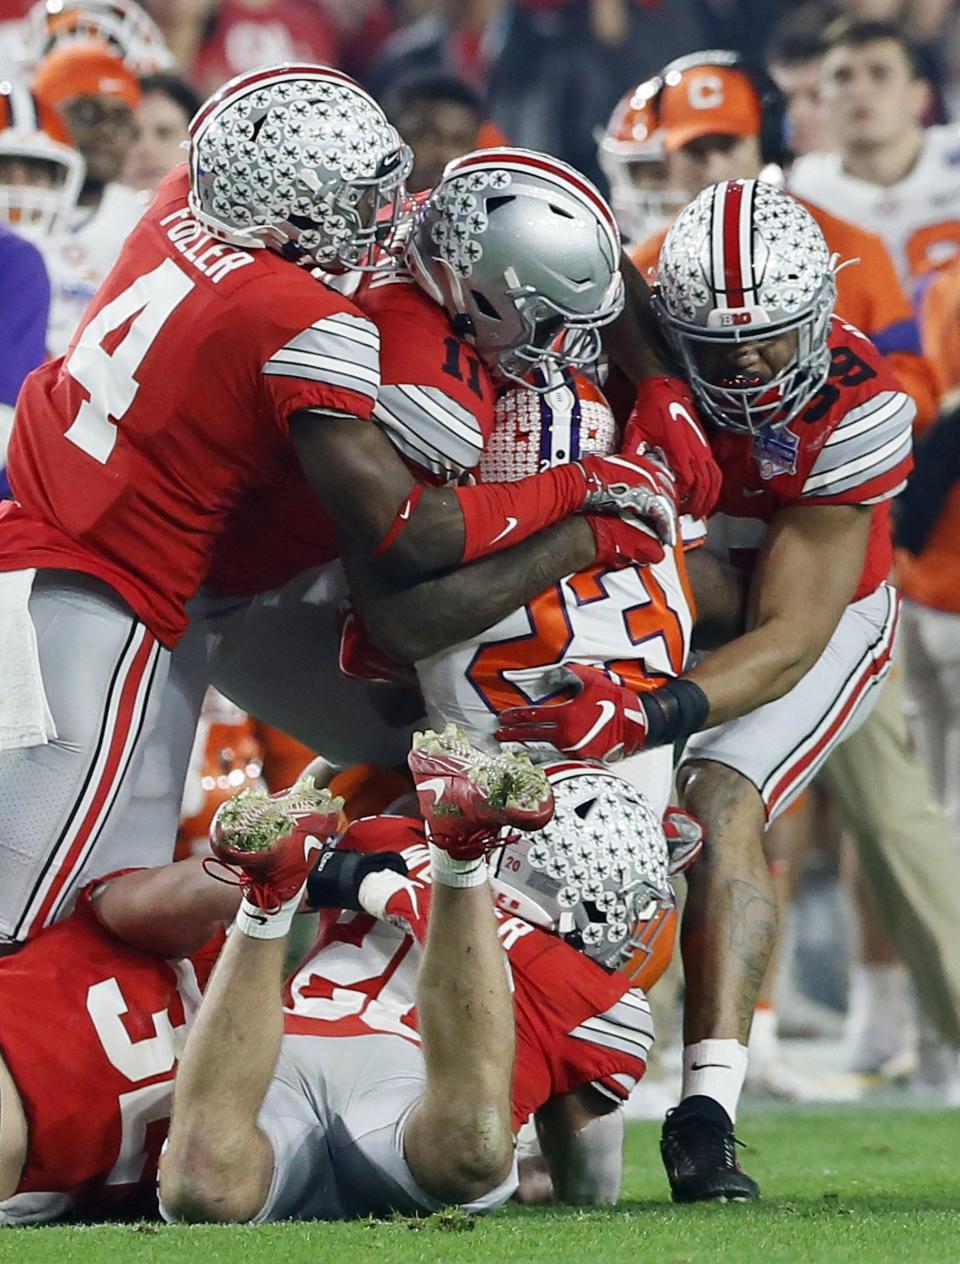 A herd of Ohio State Buckeyes defenders, including defensive end Tyreke Smith (11), tackle Clemson Tigers running back Lyn-J Dixon (23) during the first quarter of the College Football Playoff Semifinal at the PlayStation Fiesta Bowl at State Farm Stadium in Glendale, Ariz. on Saturday, Dec. 28, 2019. [Adam Cairns/Dispatch]